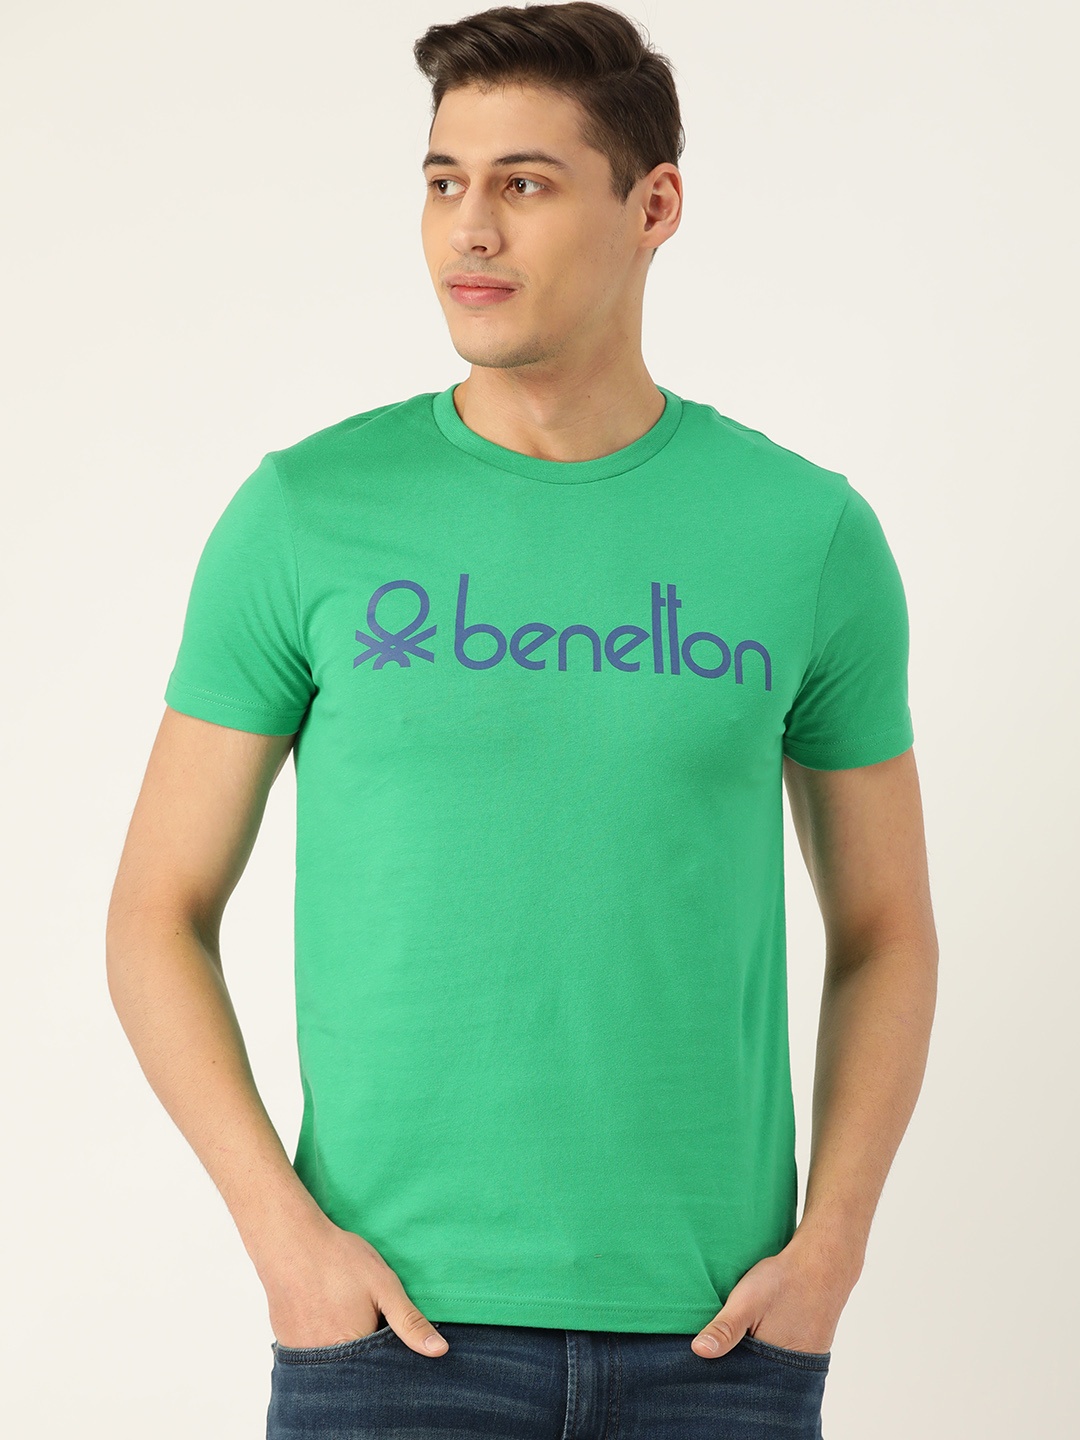 

United Colors of Benetton Men Green & Blue Slim Fit Brand Logo Printed Round Neck T-shirt